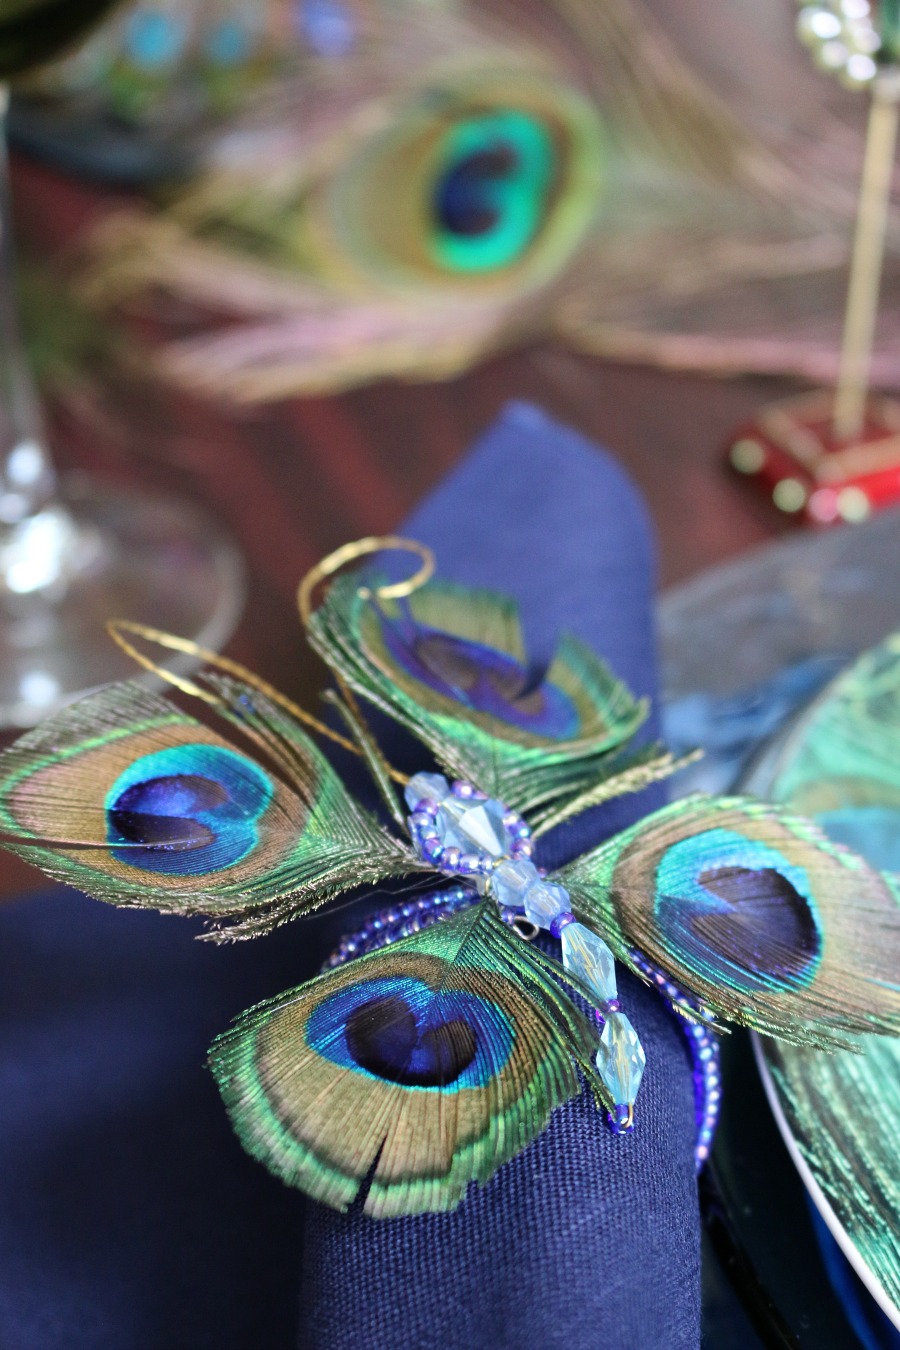 Peacock Napkin Ring - sometimes by purchasing one thing you love, you can build an entire Table Scape. Like this Peacock inspired Table Setting.